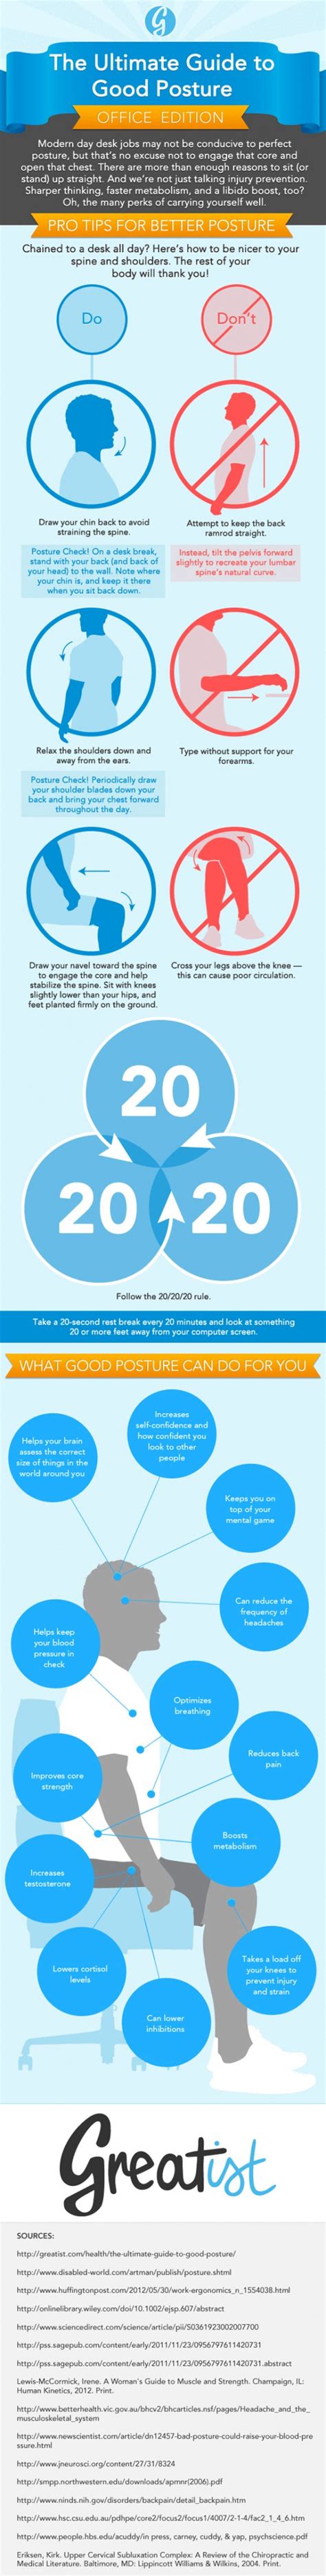 The Ultimate Guide To Good Posture At Work Infographic